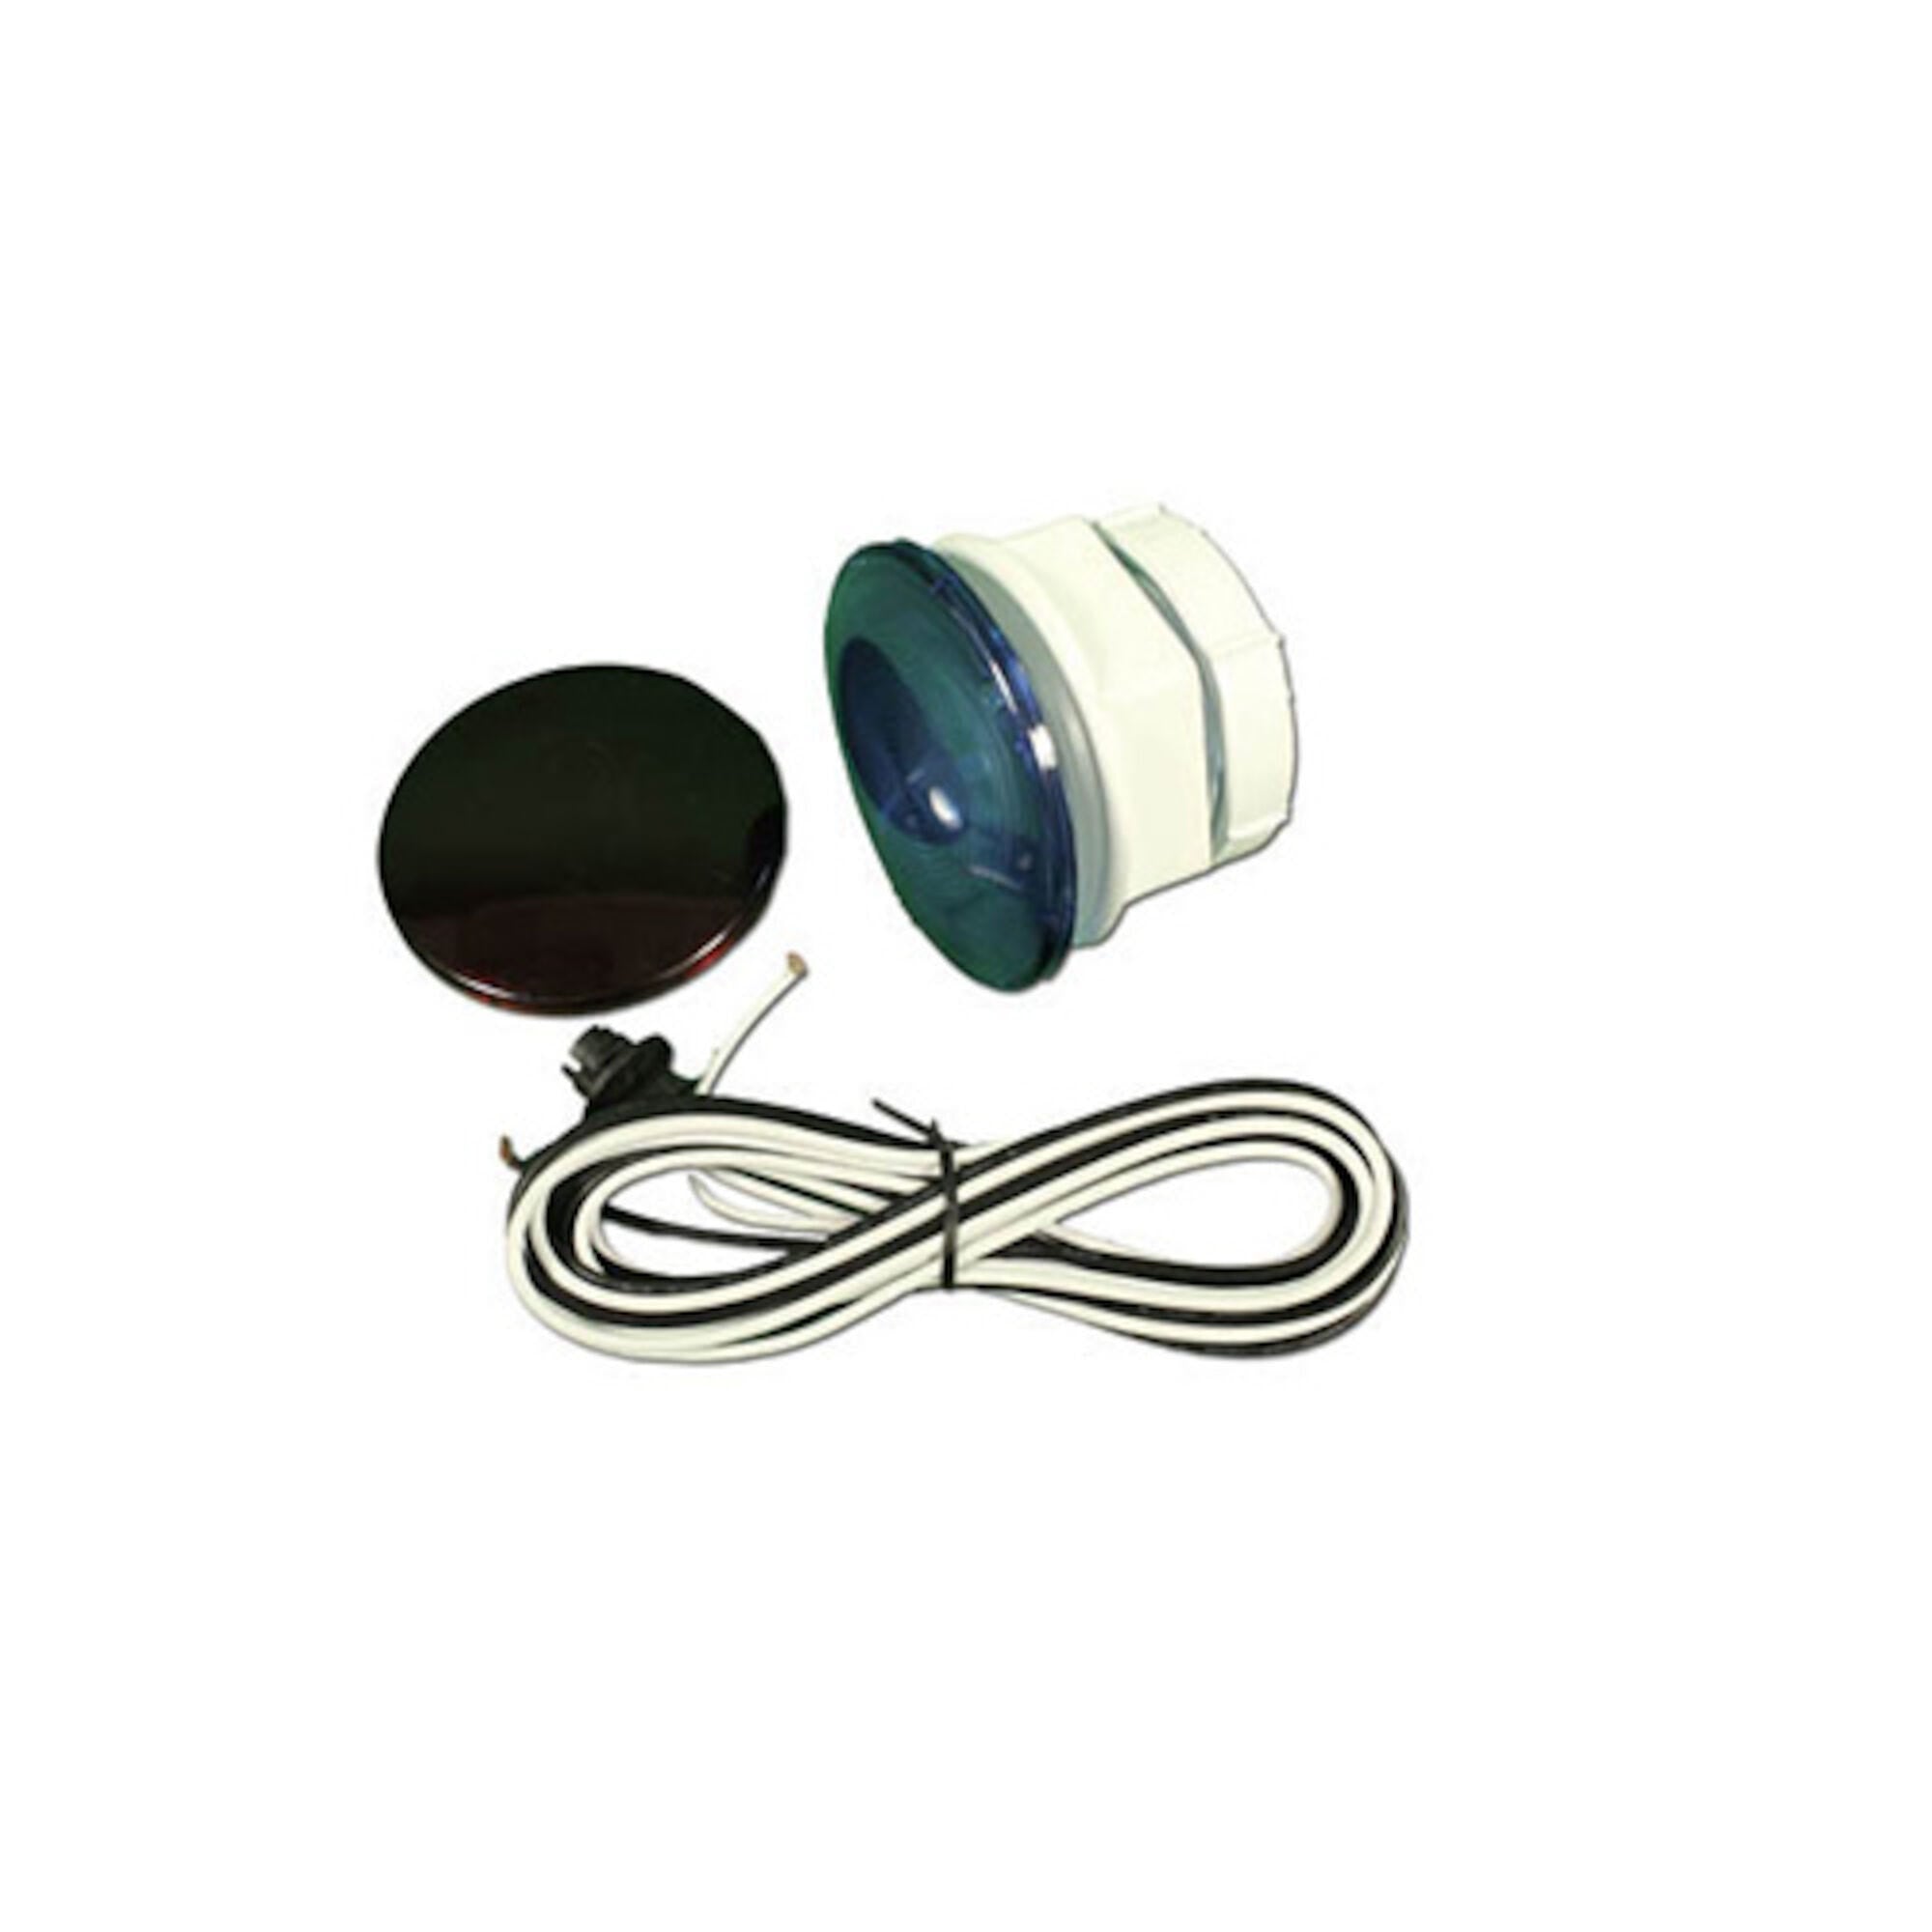 Waterway OEM Kit With 8 Foot Wire Harness and Light Lens (630-5105)